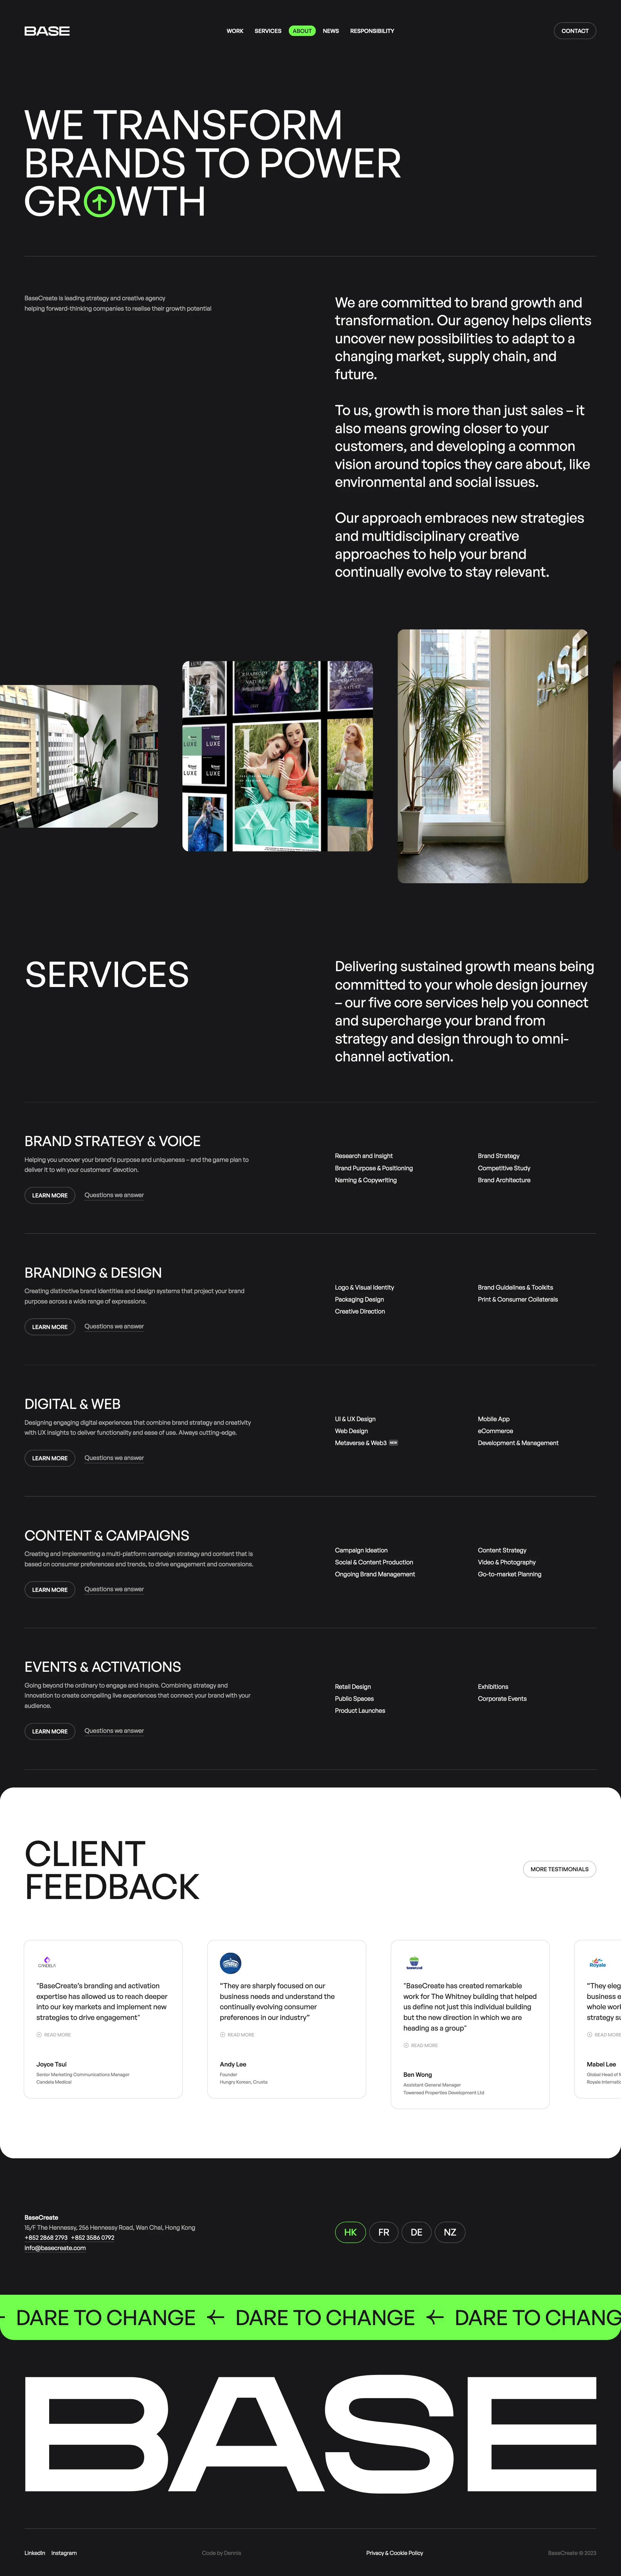 BaseCreate Landing Page Example: We are a professional full-service branding agency and marketing agency with offices in Hong Kong and Europe. We help brands to innovate and break new ground.